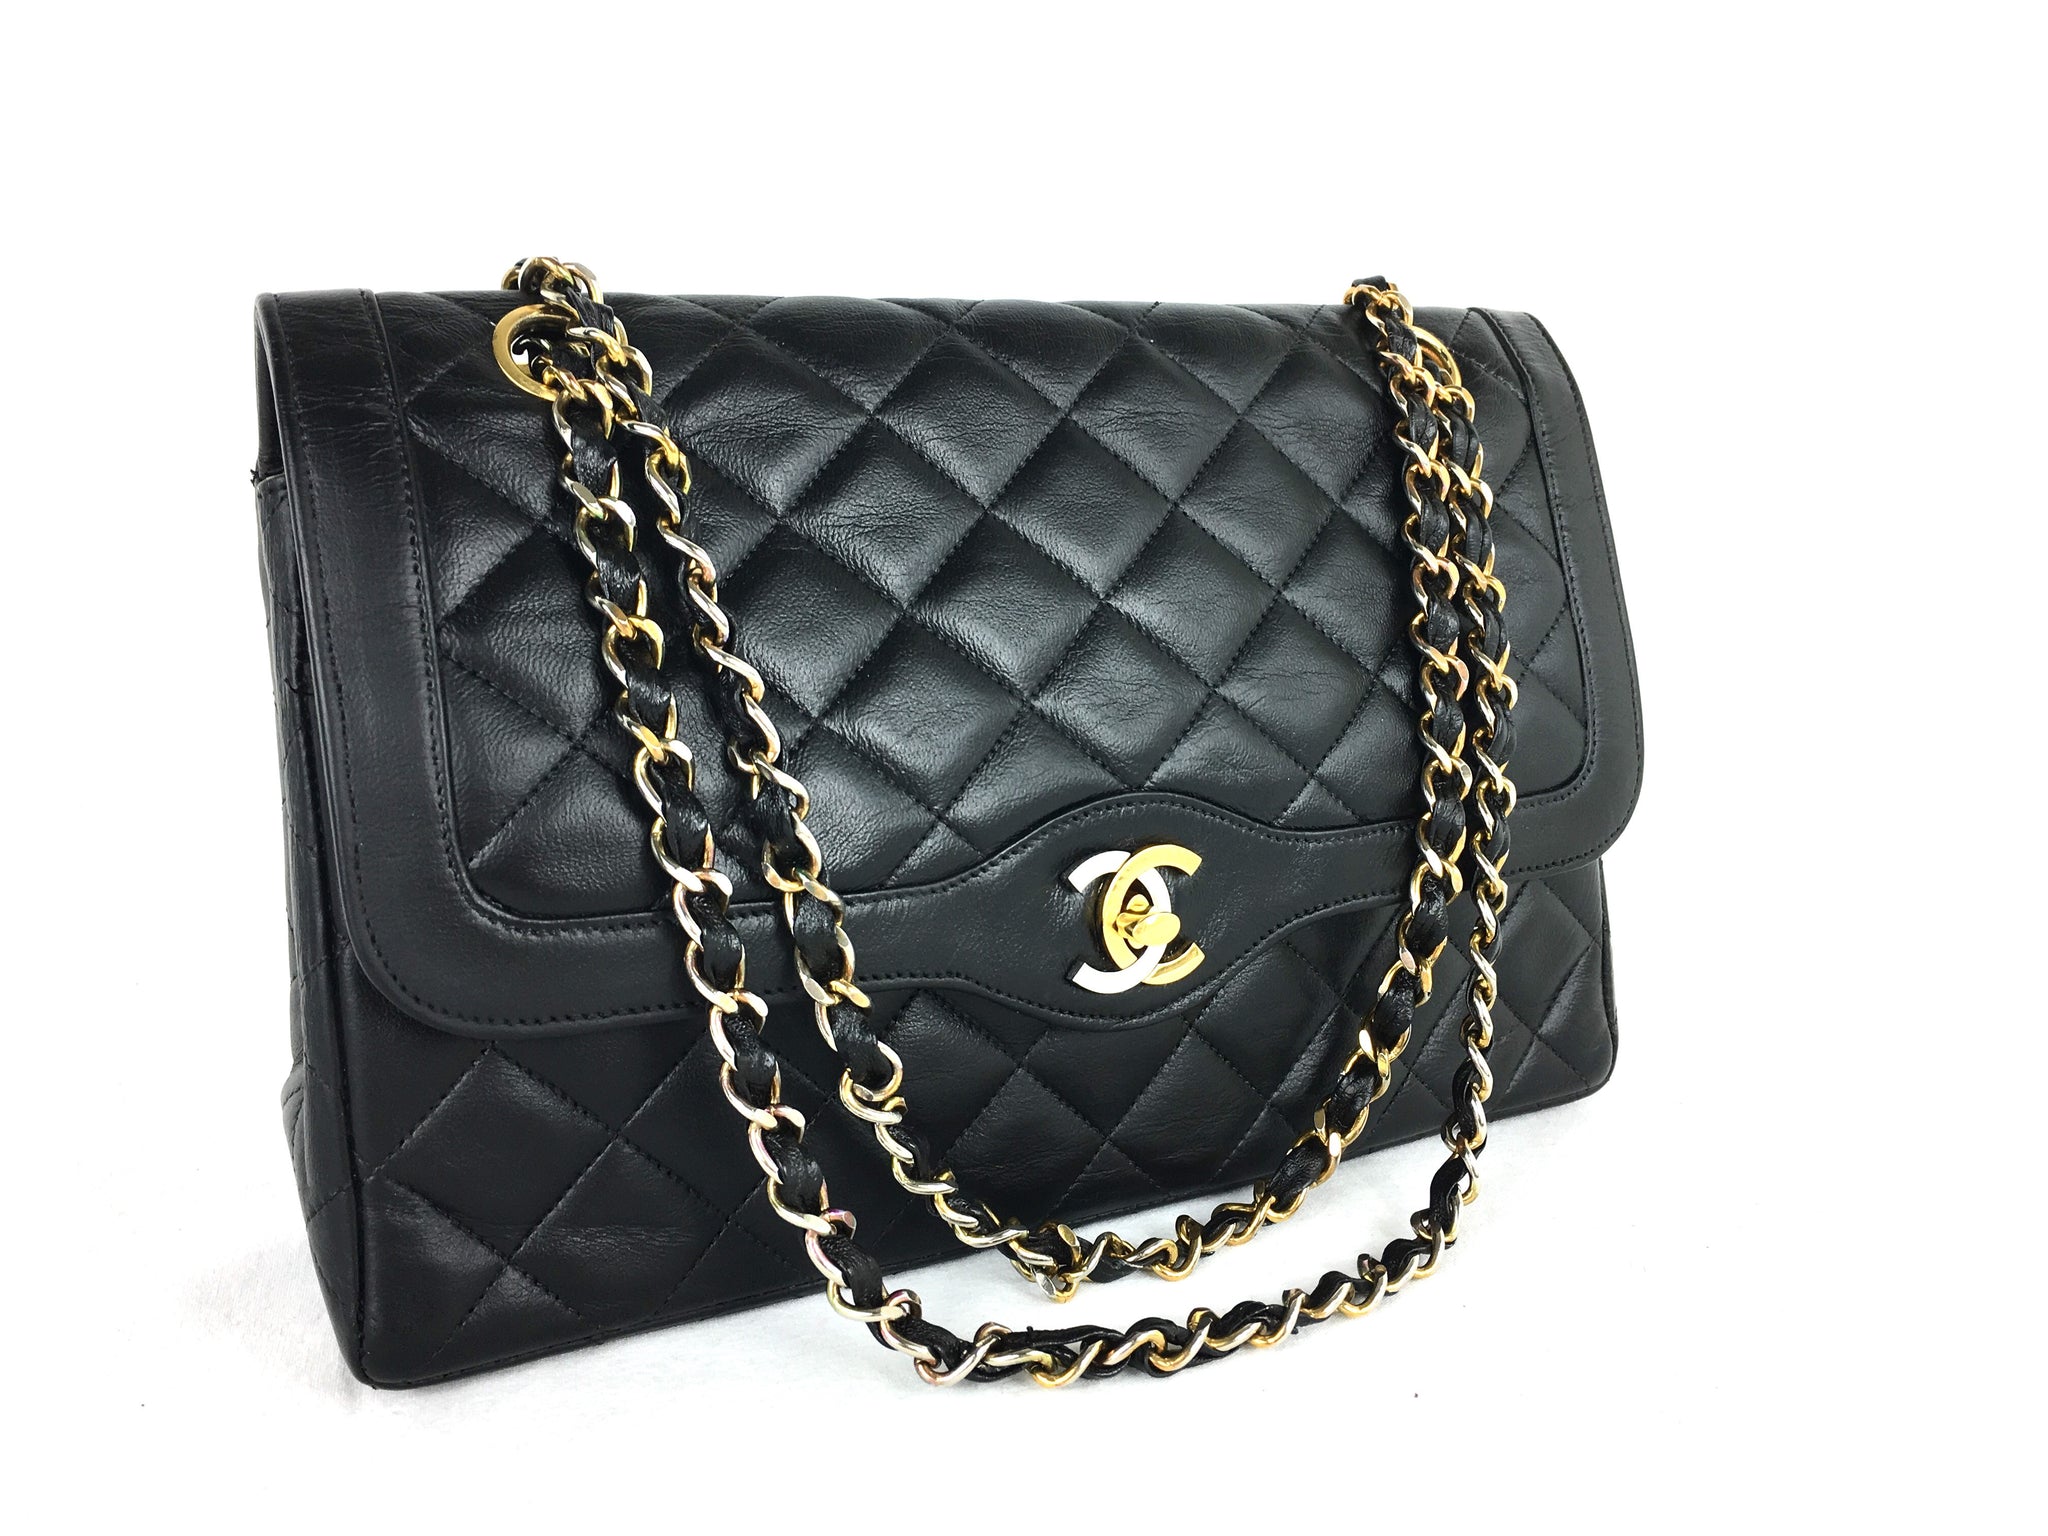 Chanel 2.55 White Double Flap Limited Edition Bag